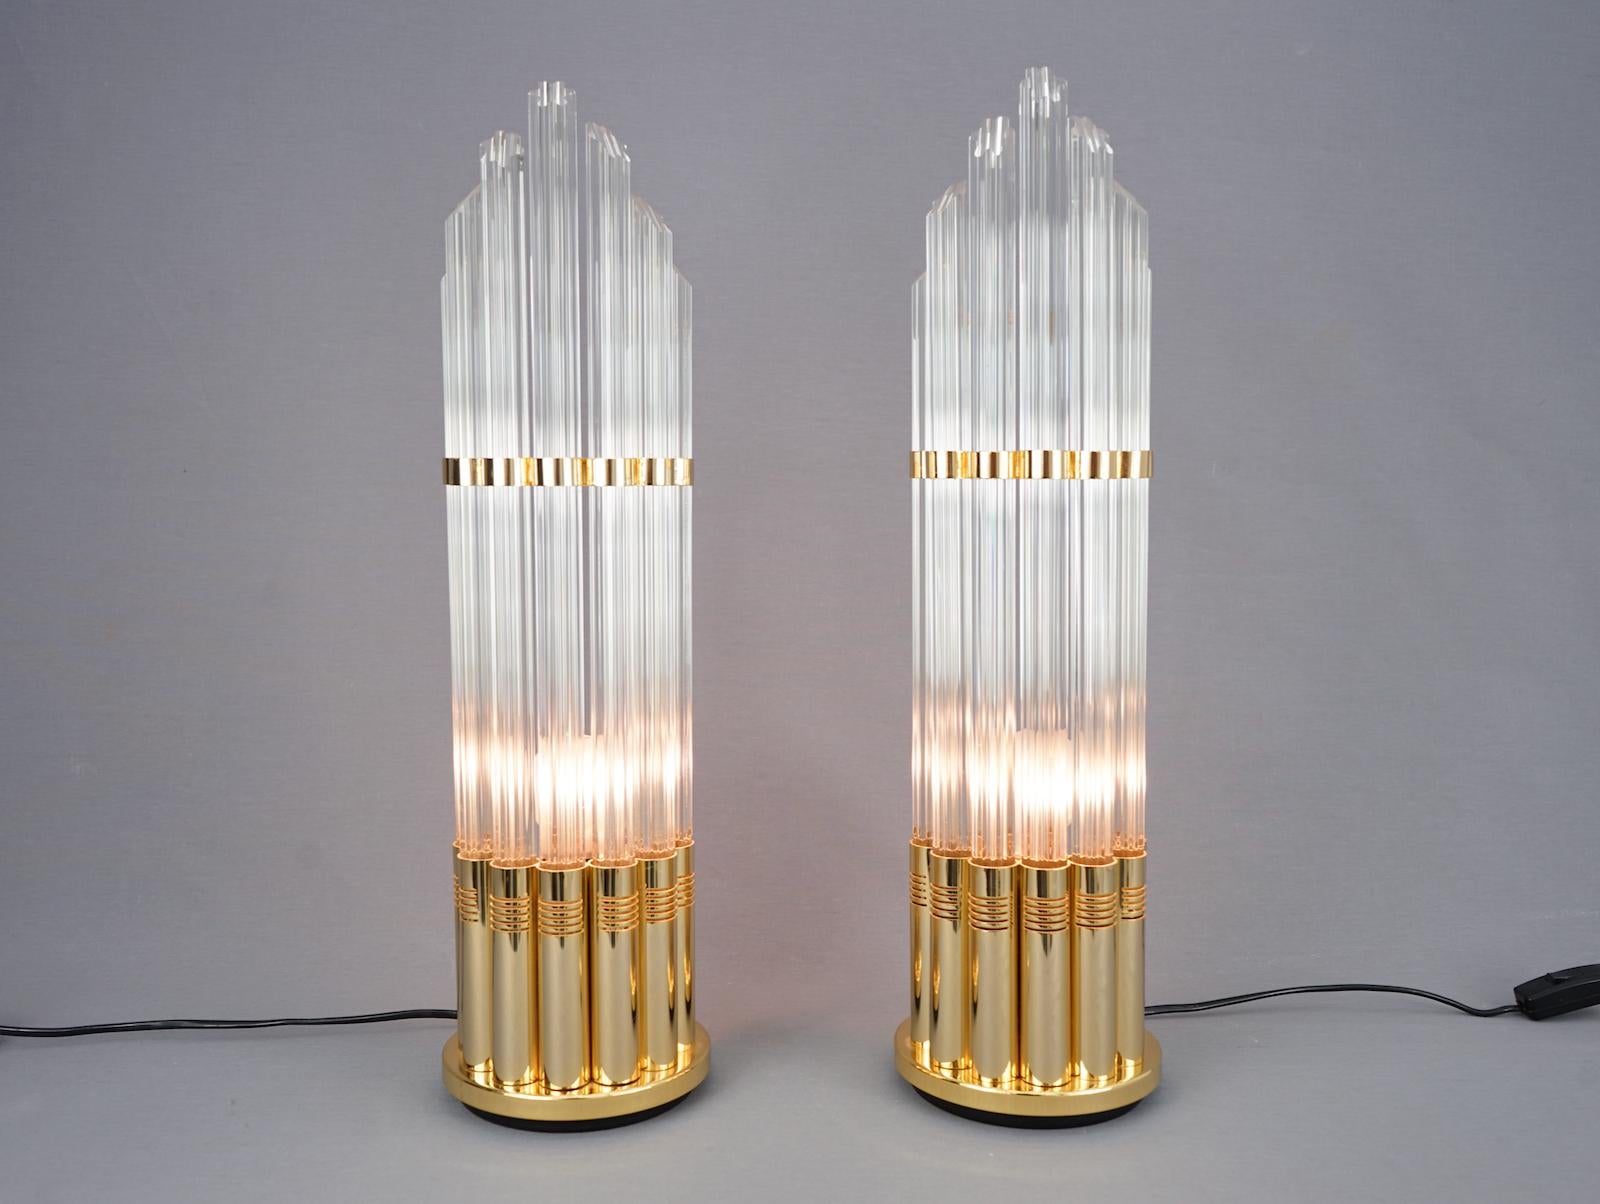 Pair of Murano glass table lamps with gilded base, Italy 1970s.

Very good condition.
